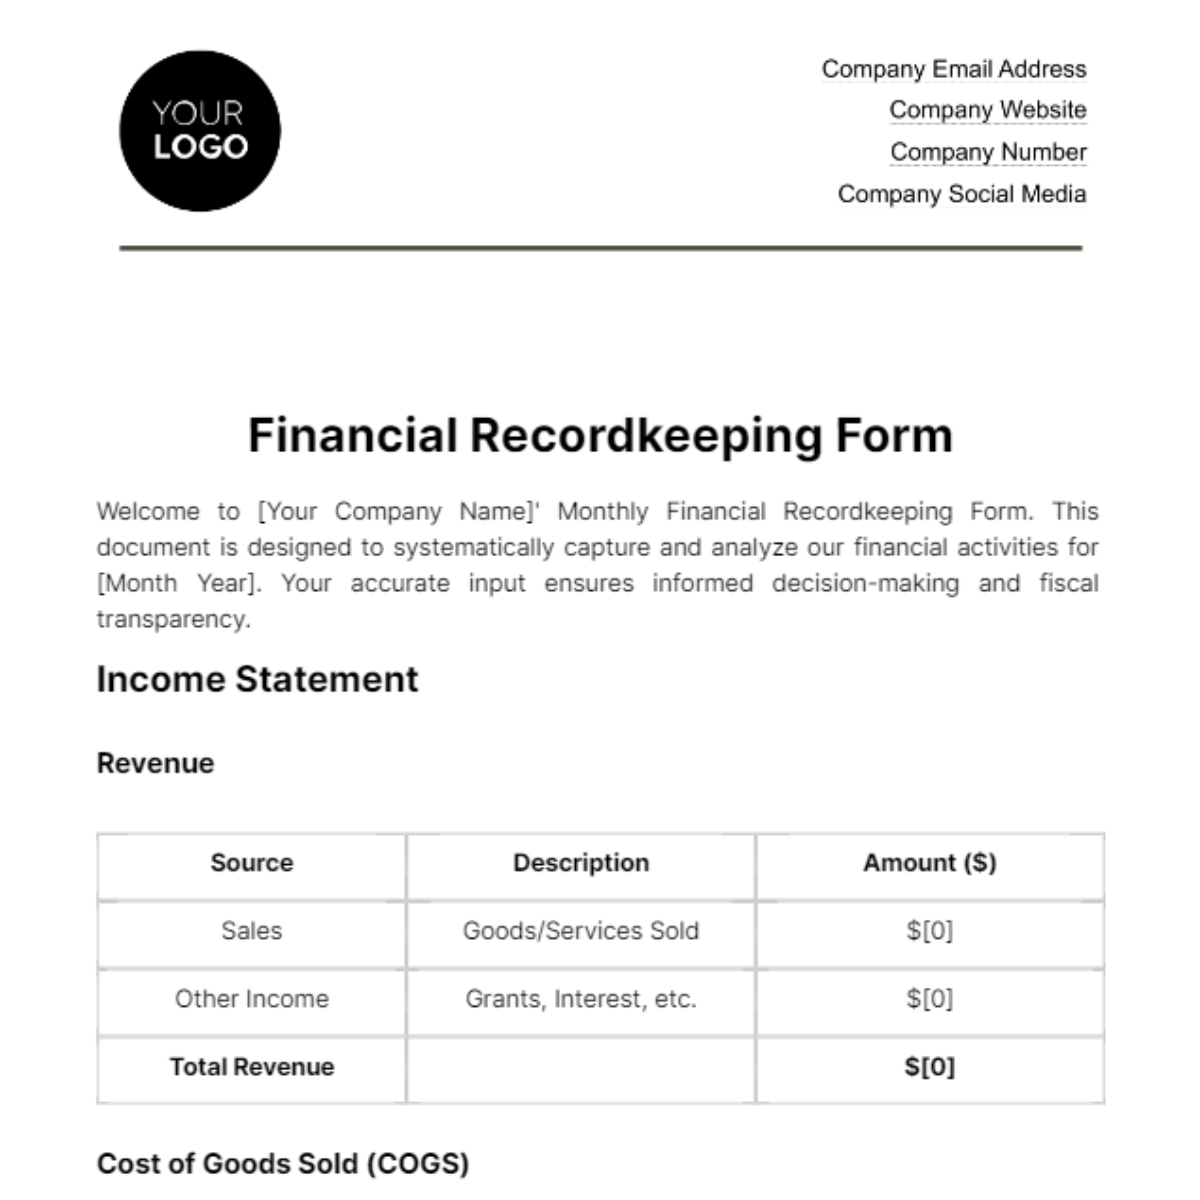 Financial Recordkeeping Form Template